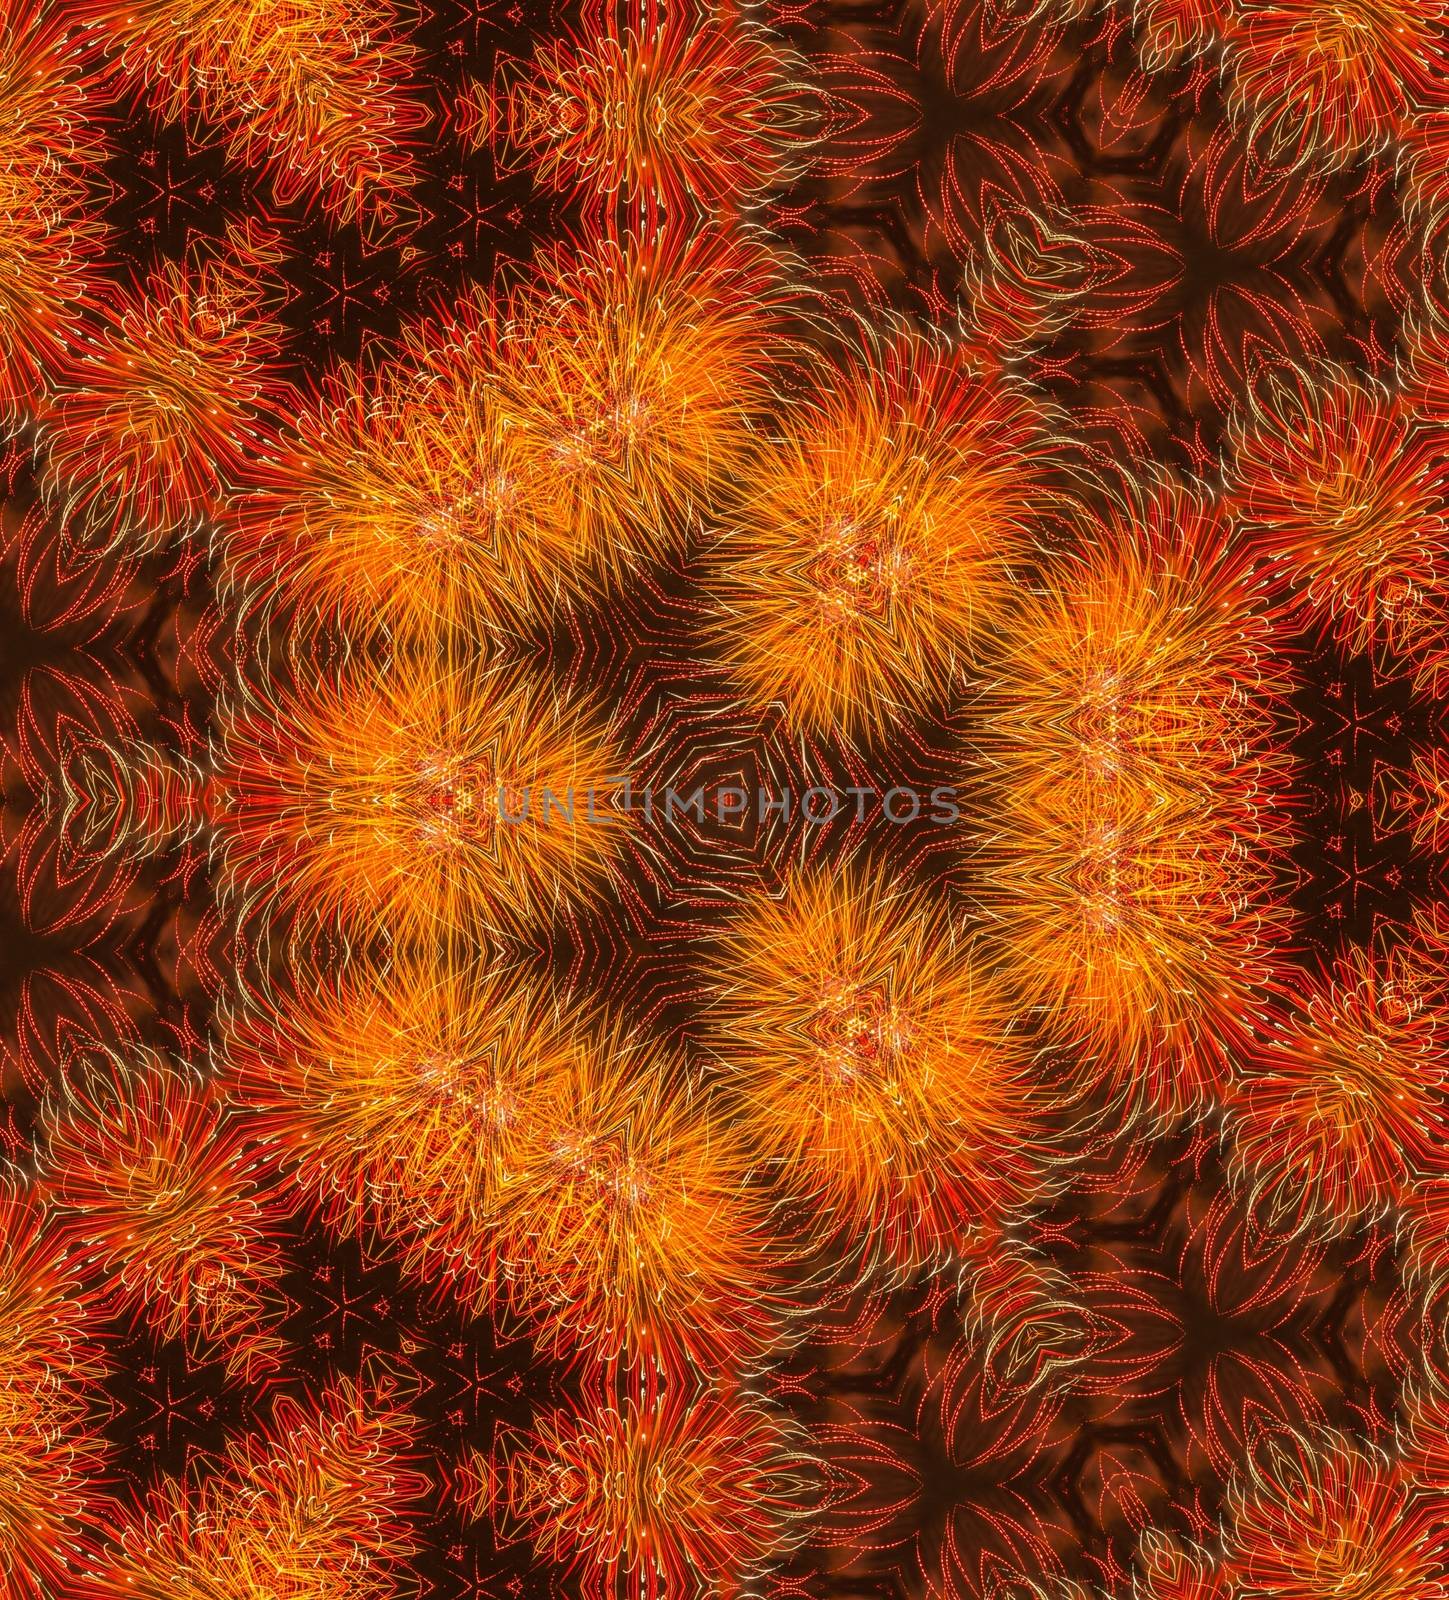 Abstract reflection of Colorful fireworks explosion in the dark sky, Kaleidoscope,Illustration by peerapixs